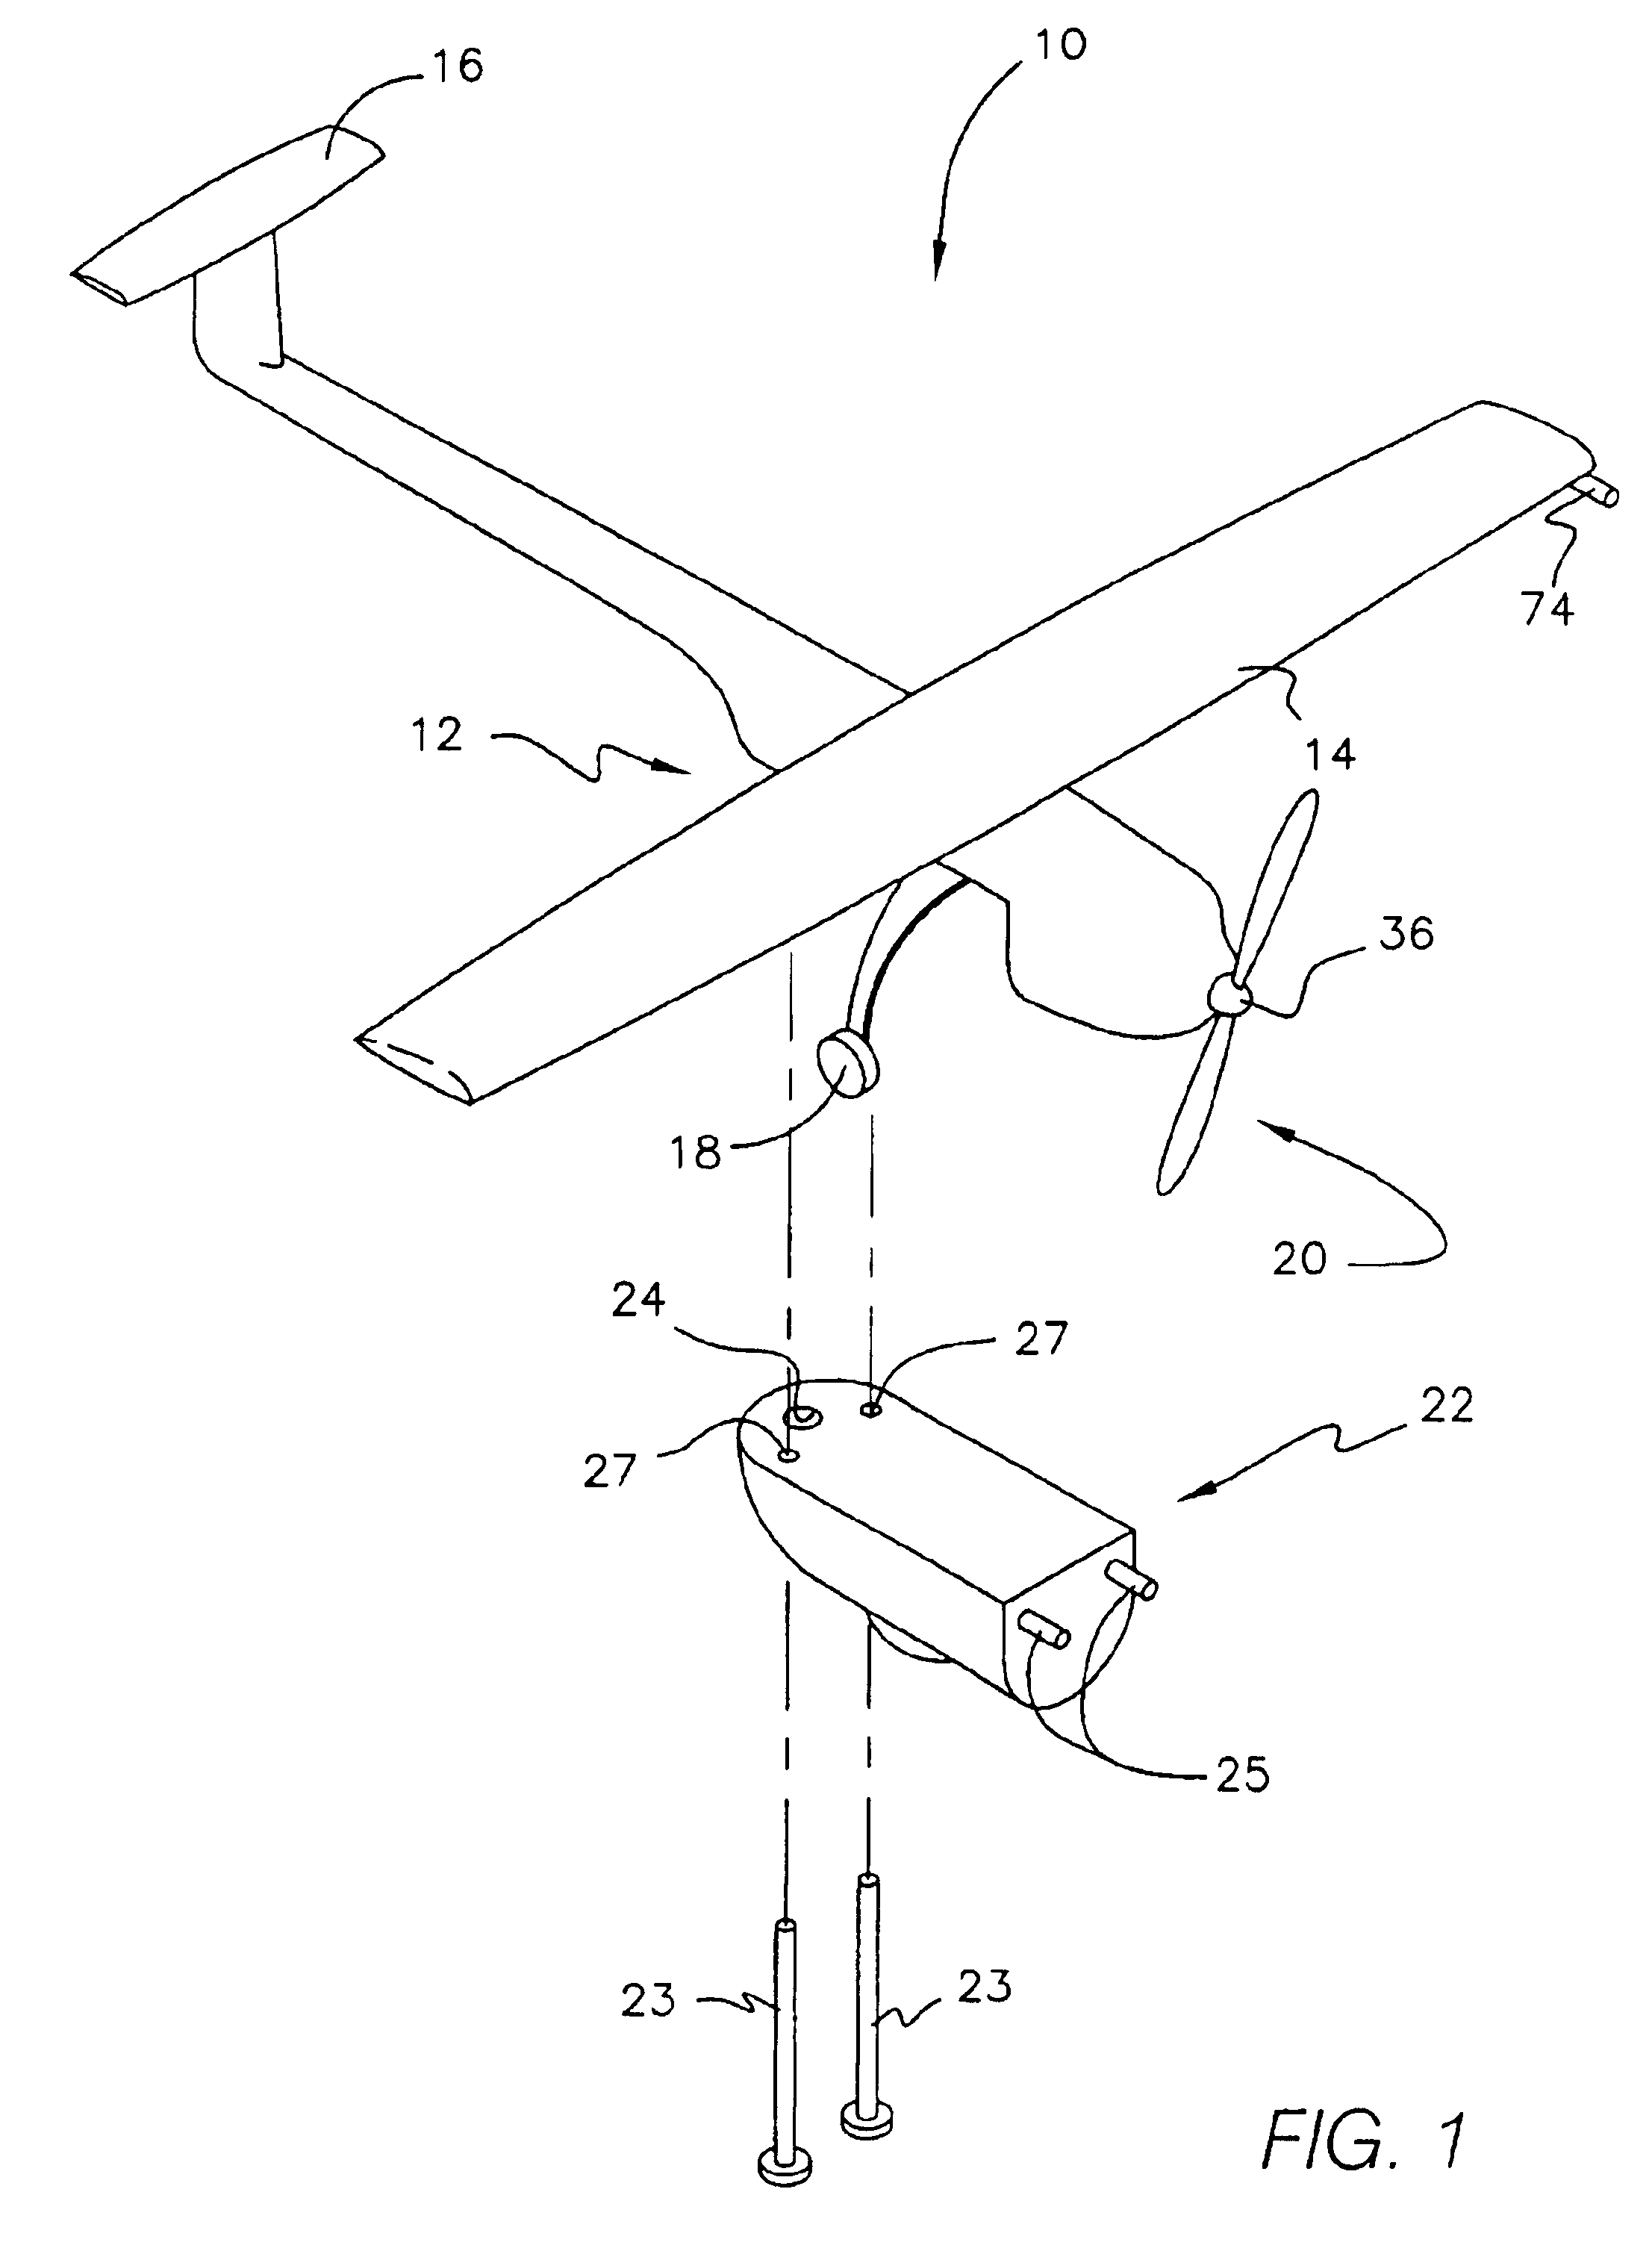 Miniature, unmanned aircraft with interchangeable data module